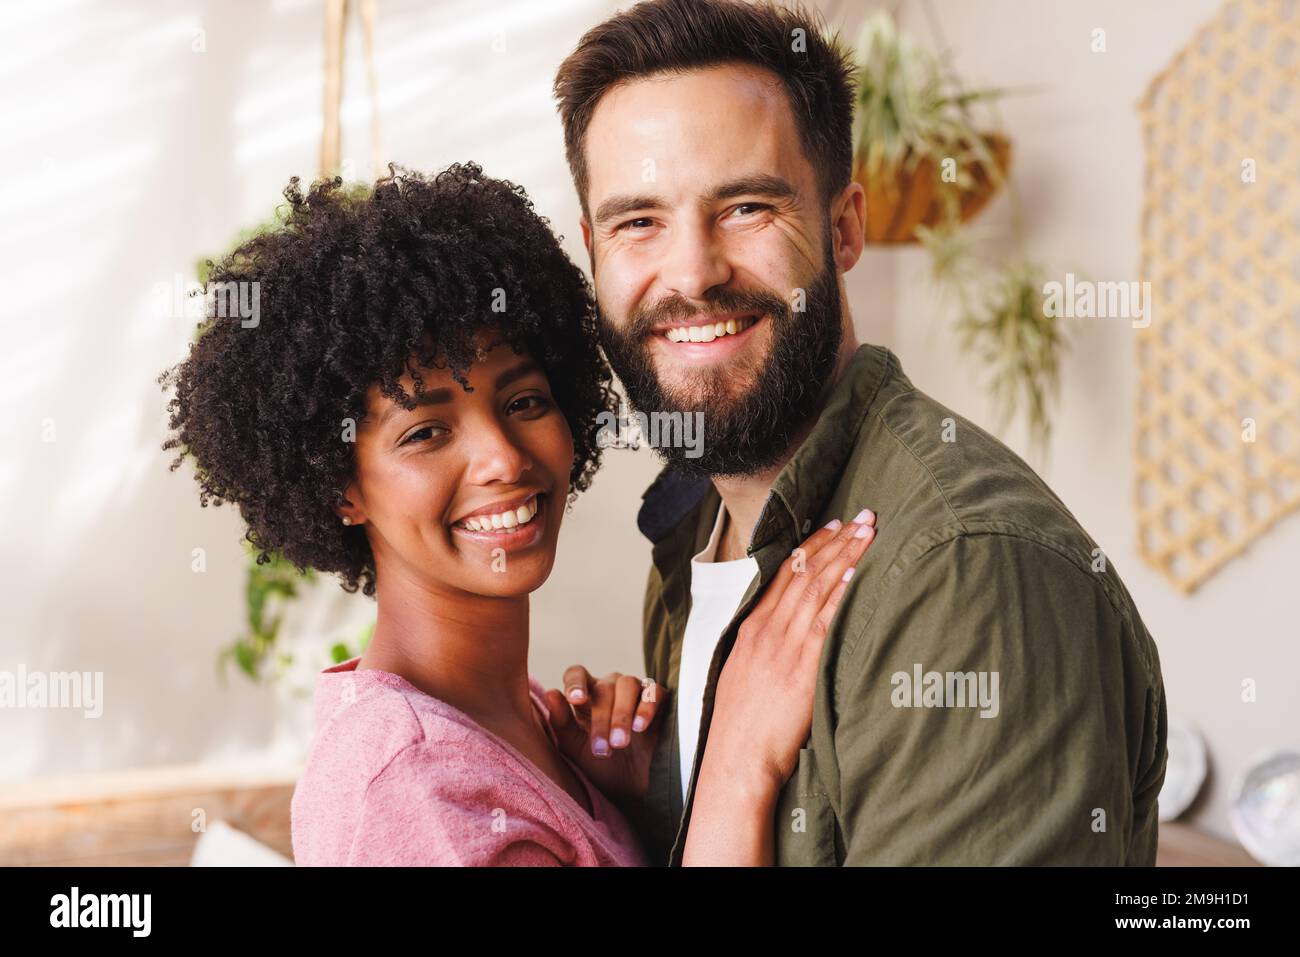 Close-up portrait of cheerful biracial young couple hugging against white wall, copy space Stock Photo